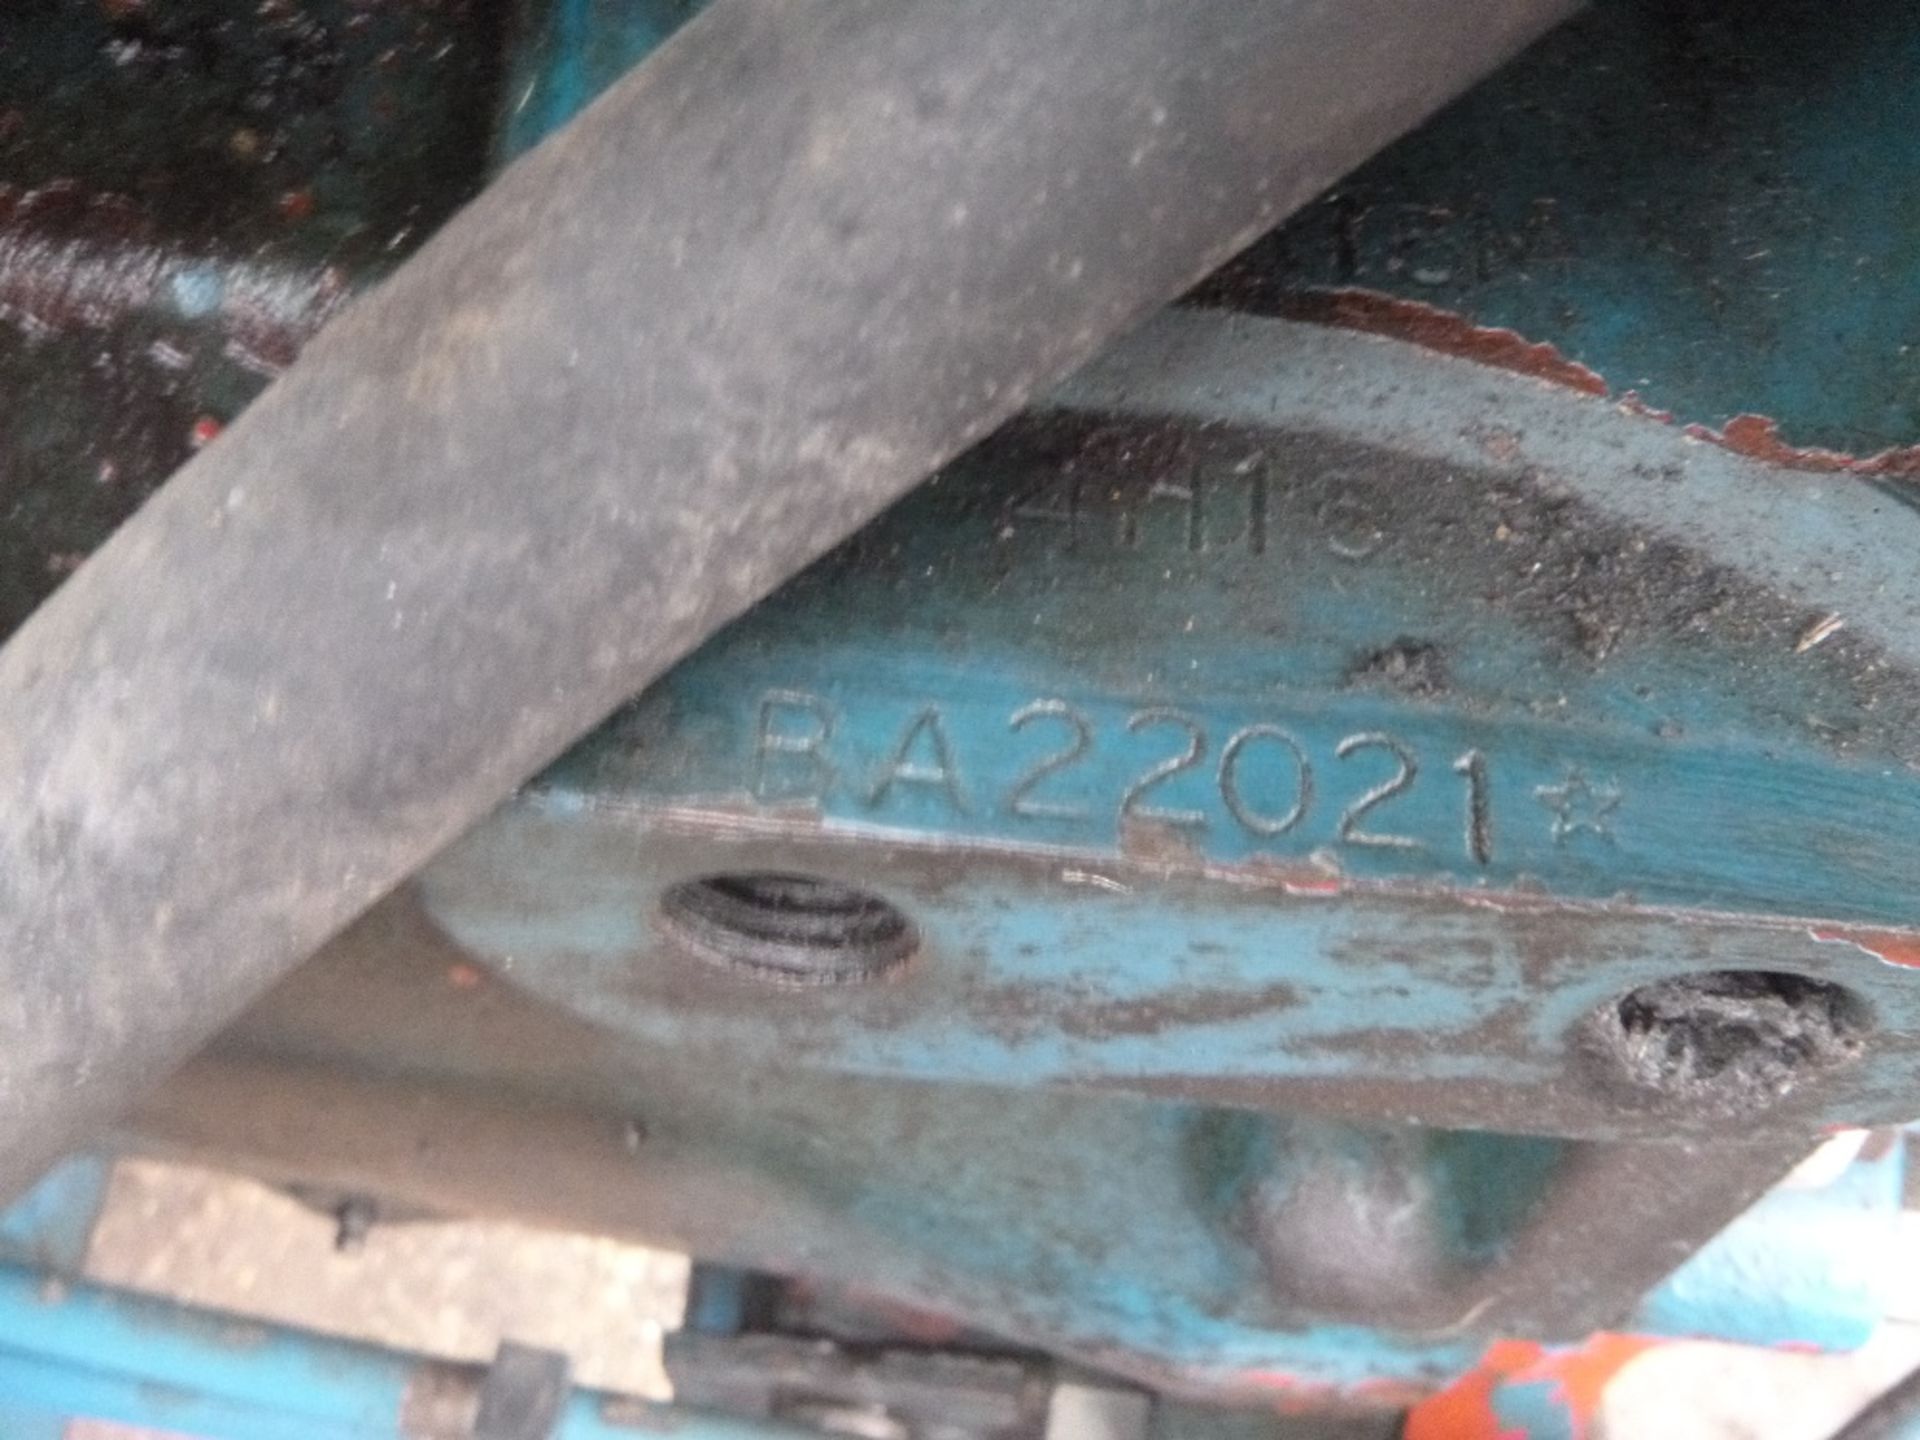 Ford 5610 2wd Tractor with Floor Change Gearbox. Reg. No. B621 UOW Ser. No. BA22021 - Image 13 of 13